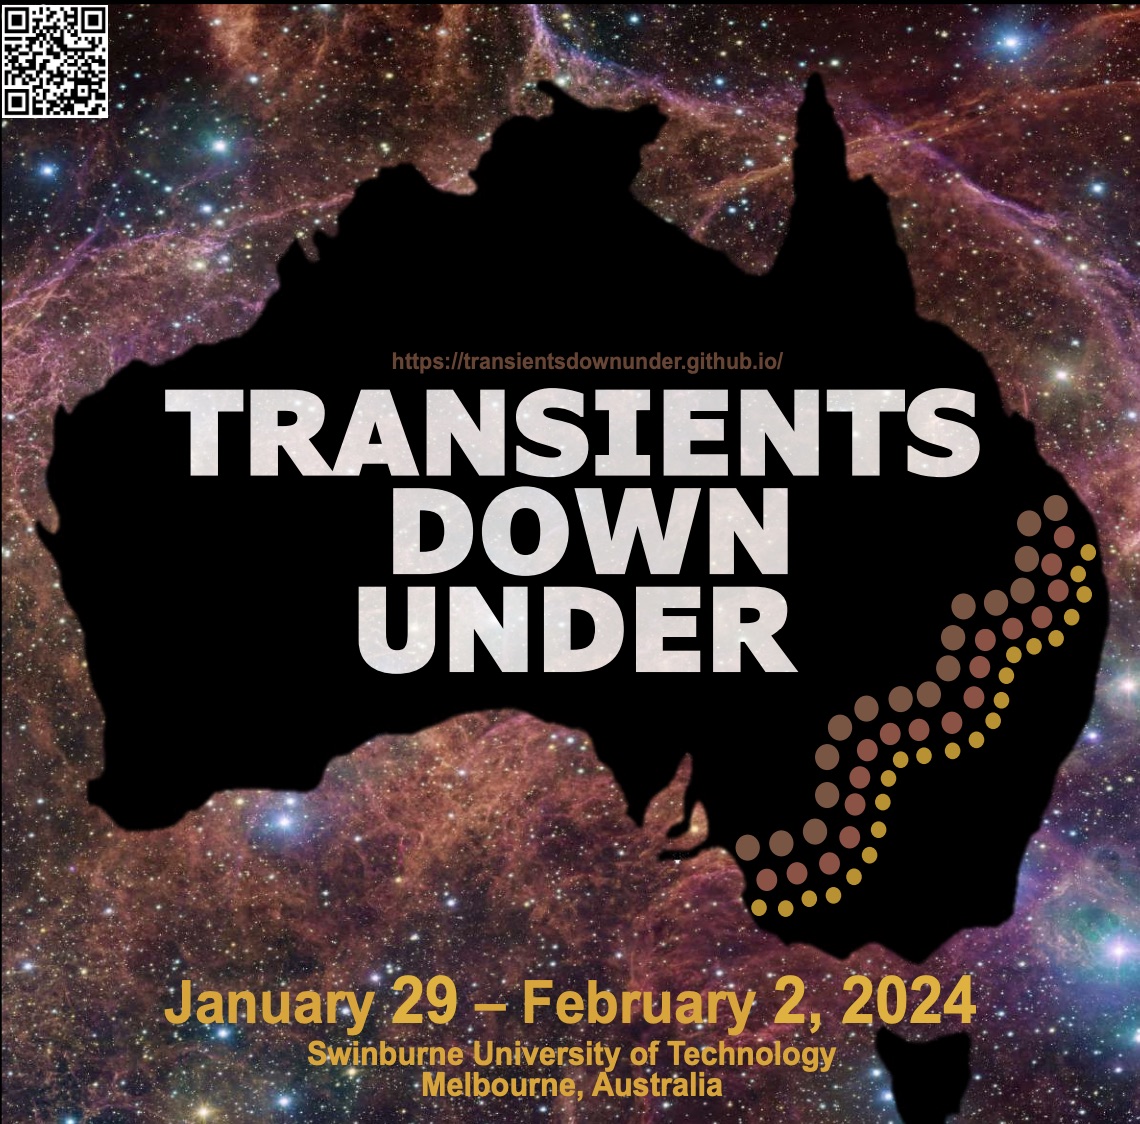 The image advertising the Transients Down Under conference